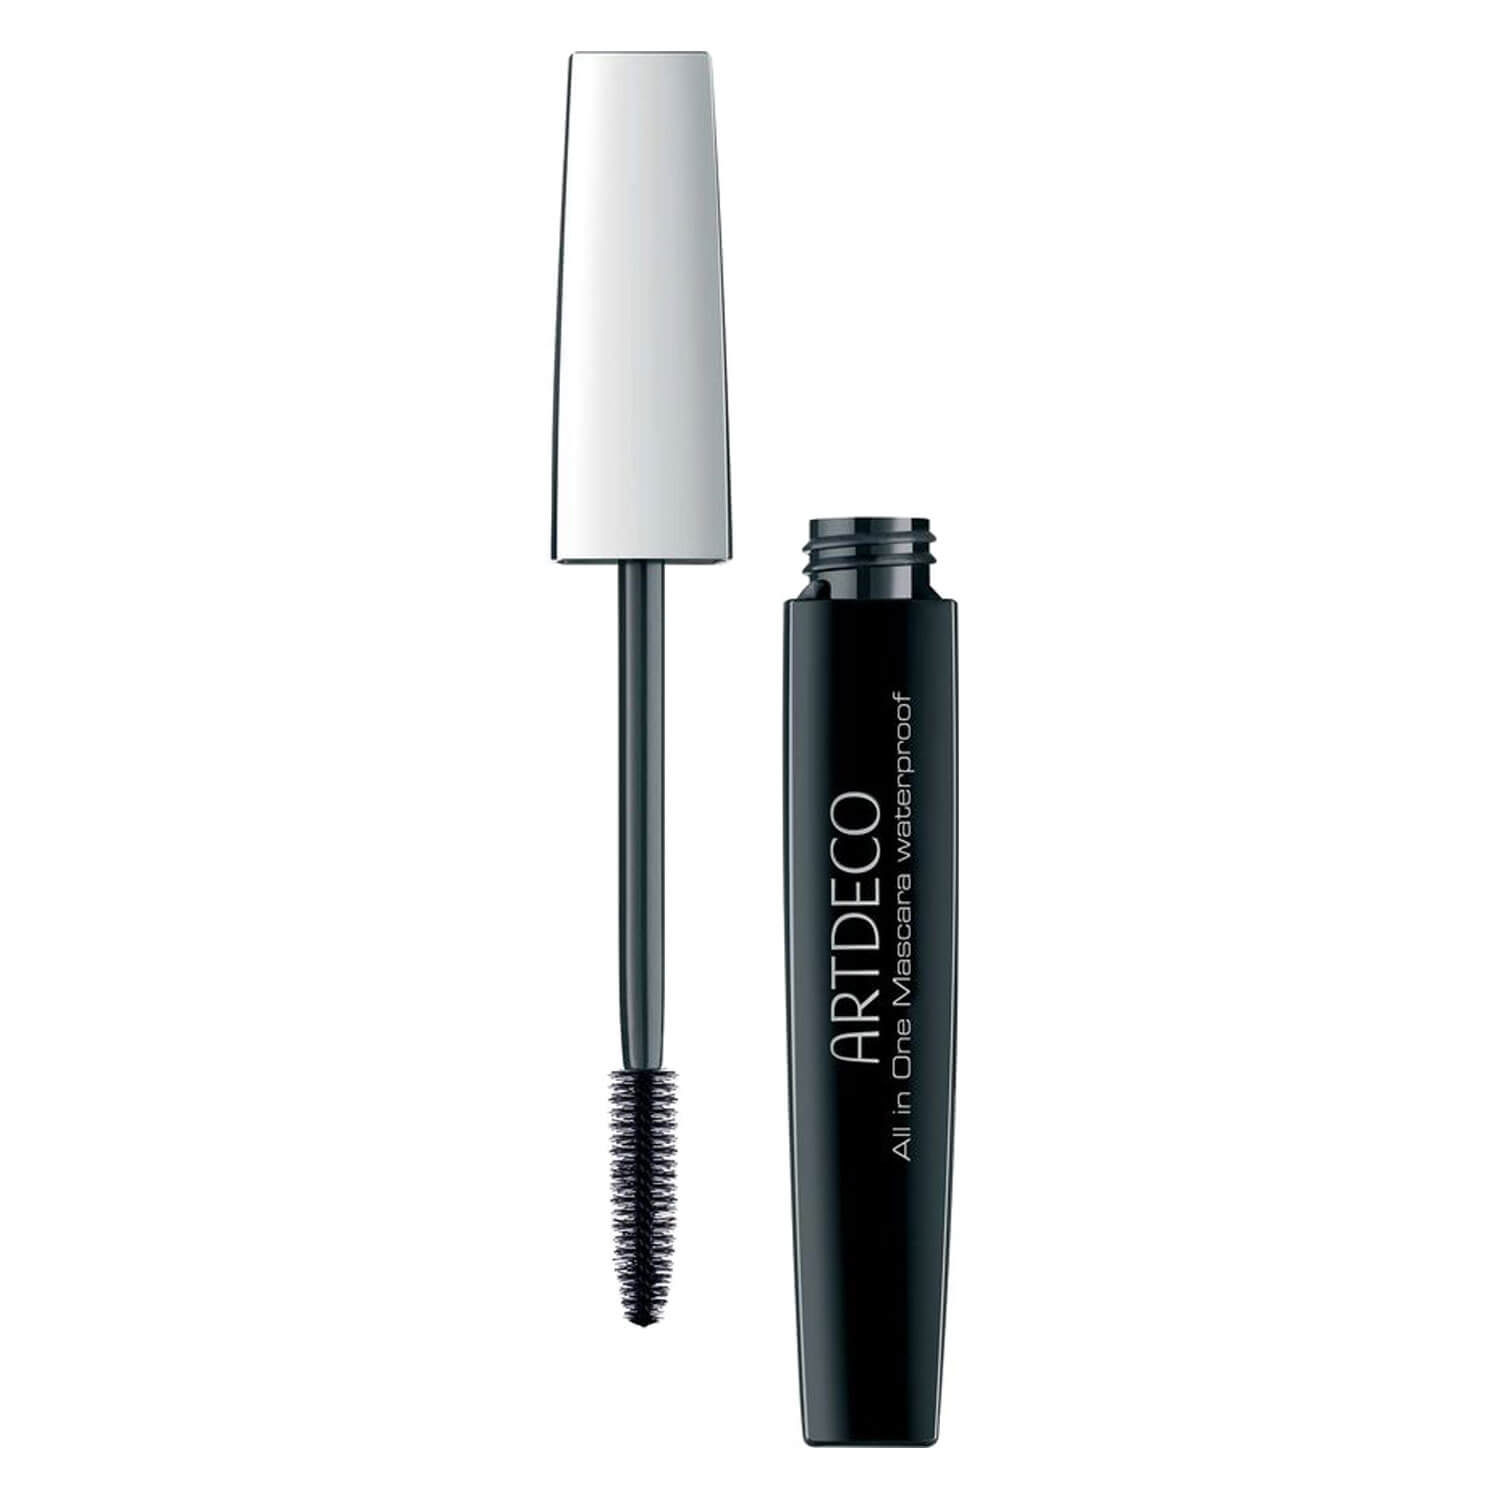 Product image from Artdeco Mascara - All in One Mascara Black Waterproof